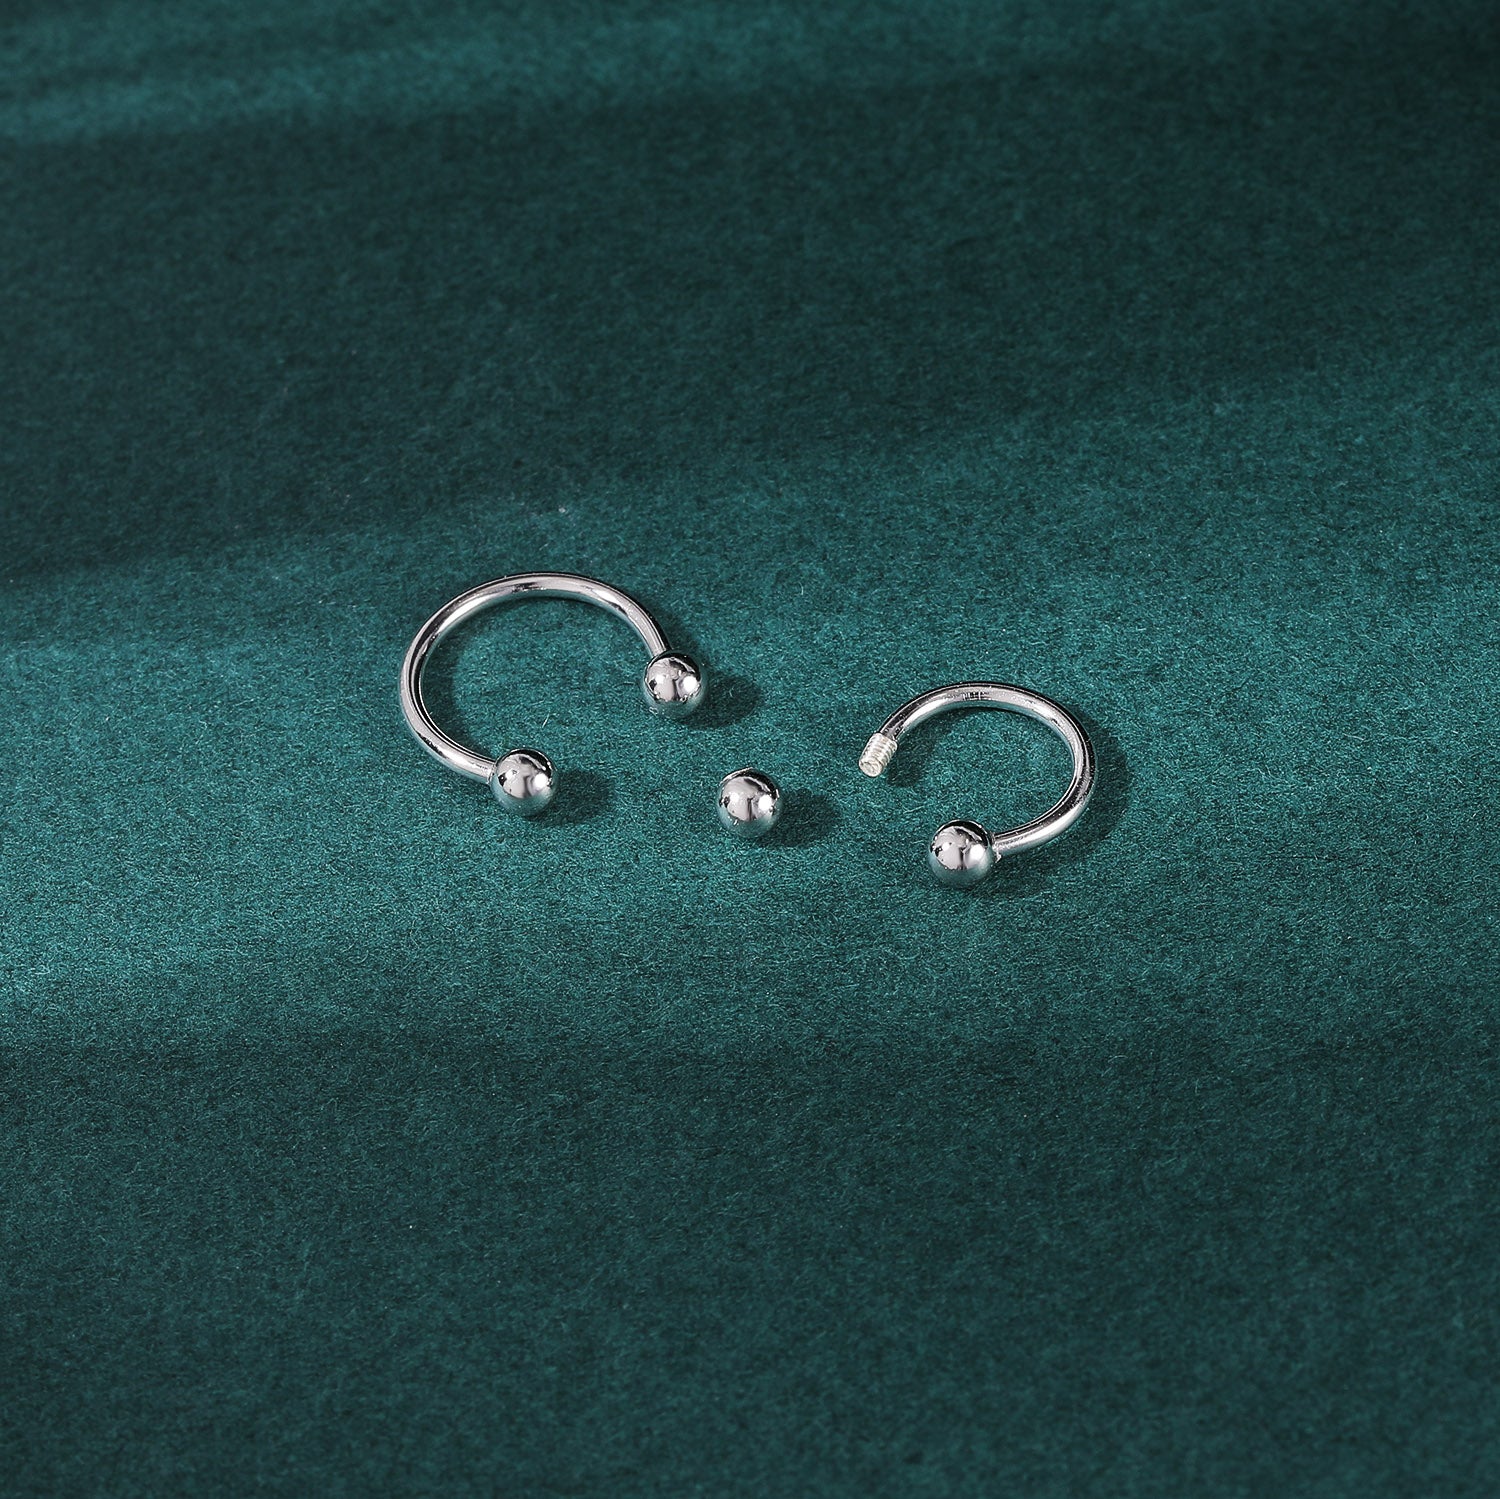 16G-Horseshoe-Spike-Bar-Septum-Rings-925-Sterling-Silver-Nose-Rings-Ear-Conch-Cartilage-Helix-Piercing